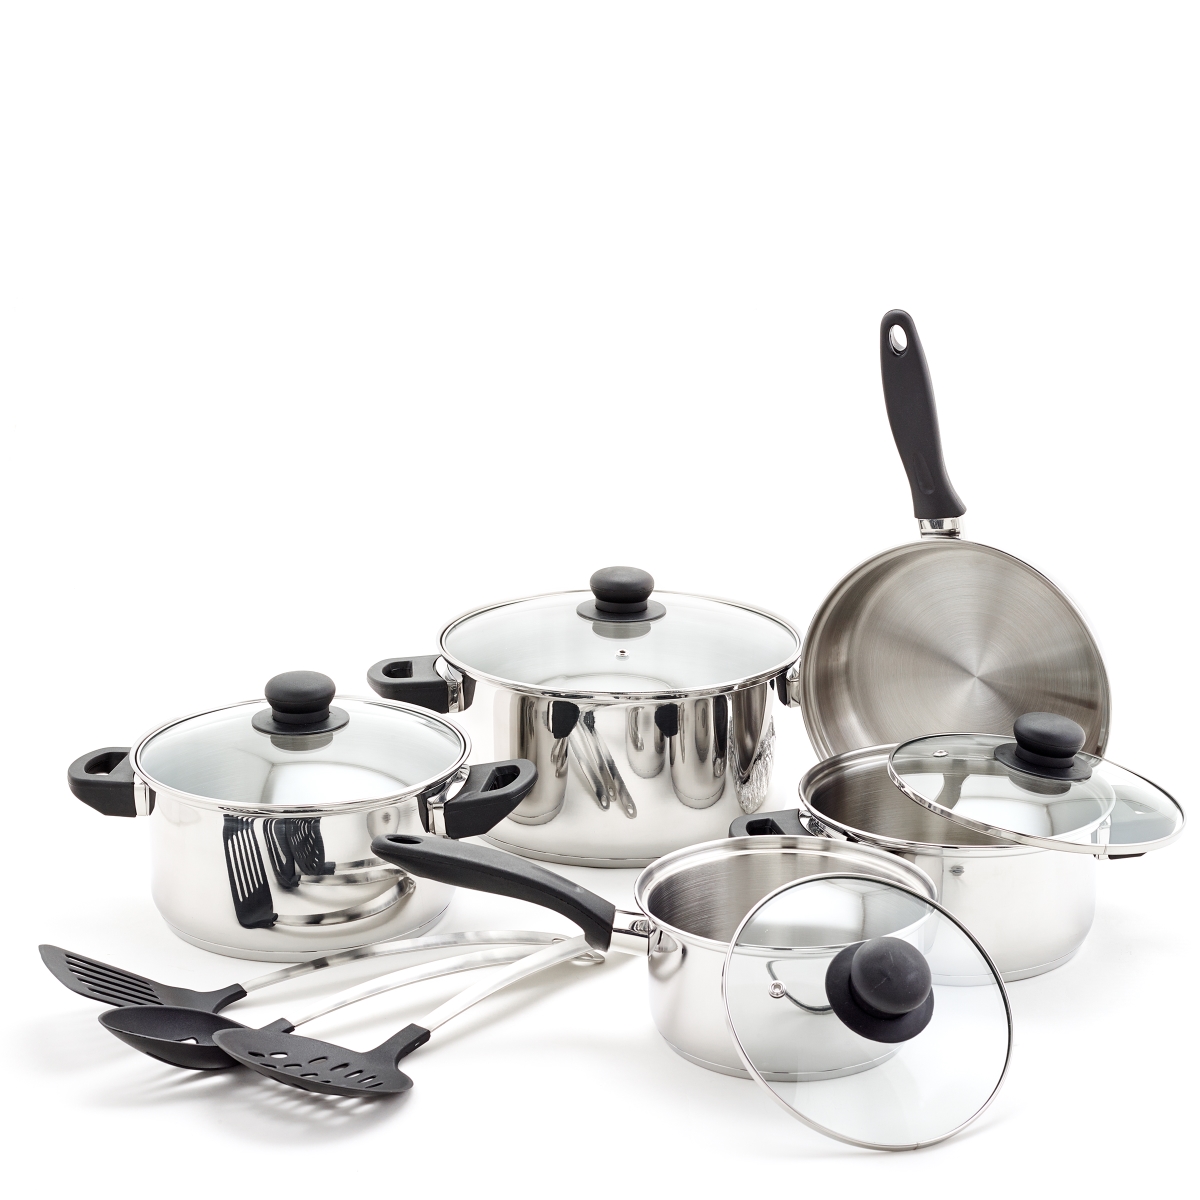 1515 Stainless Steel Cookware Set & Kitchen Tools - 12 Piece